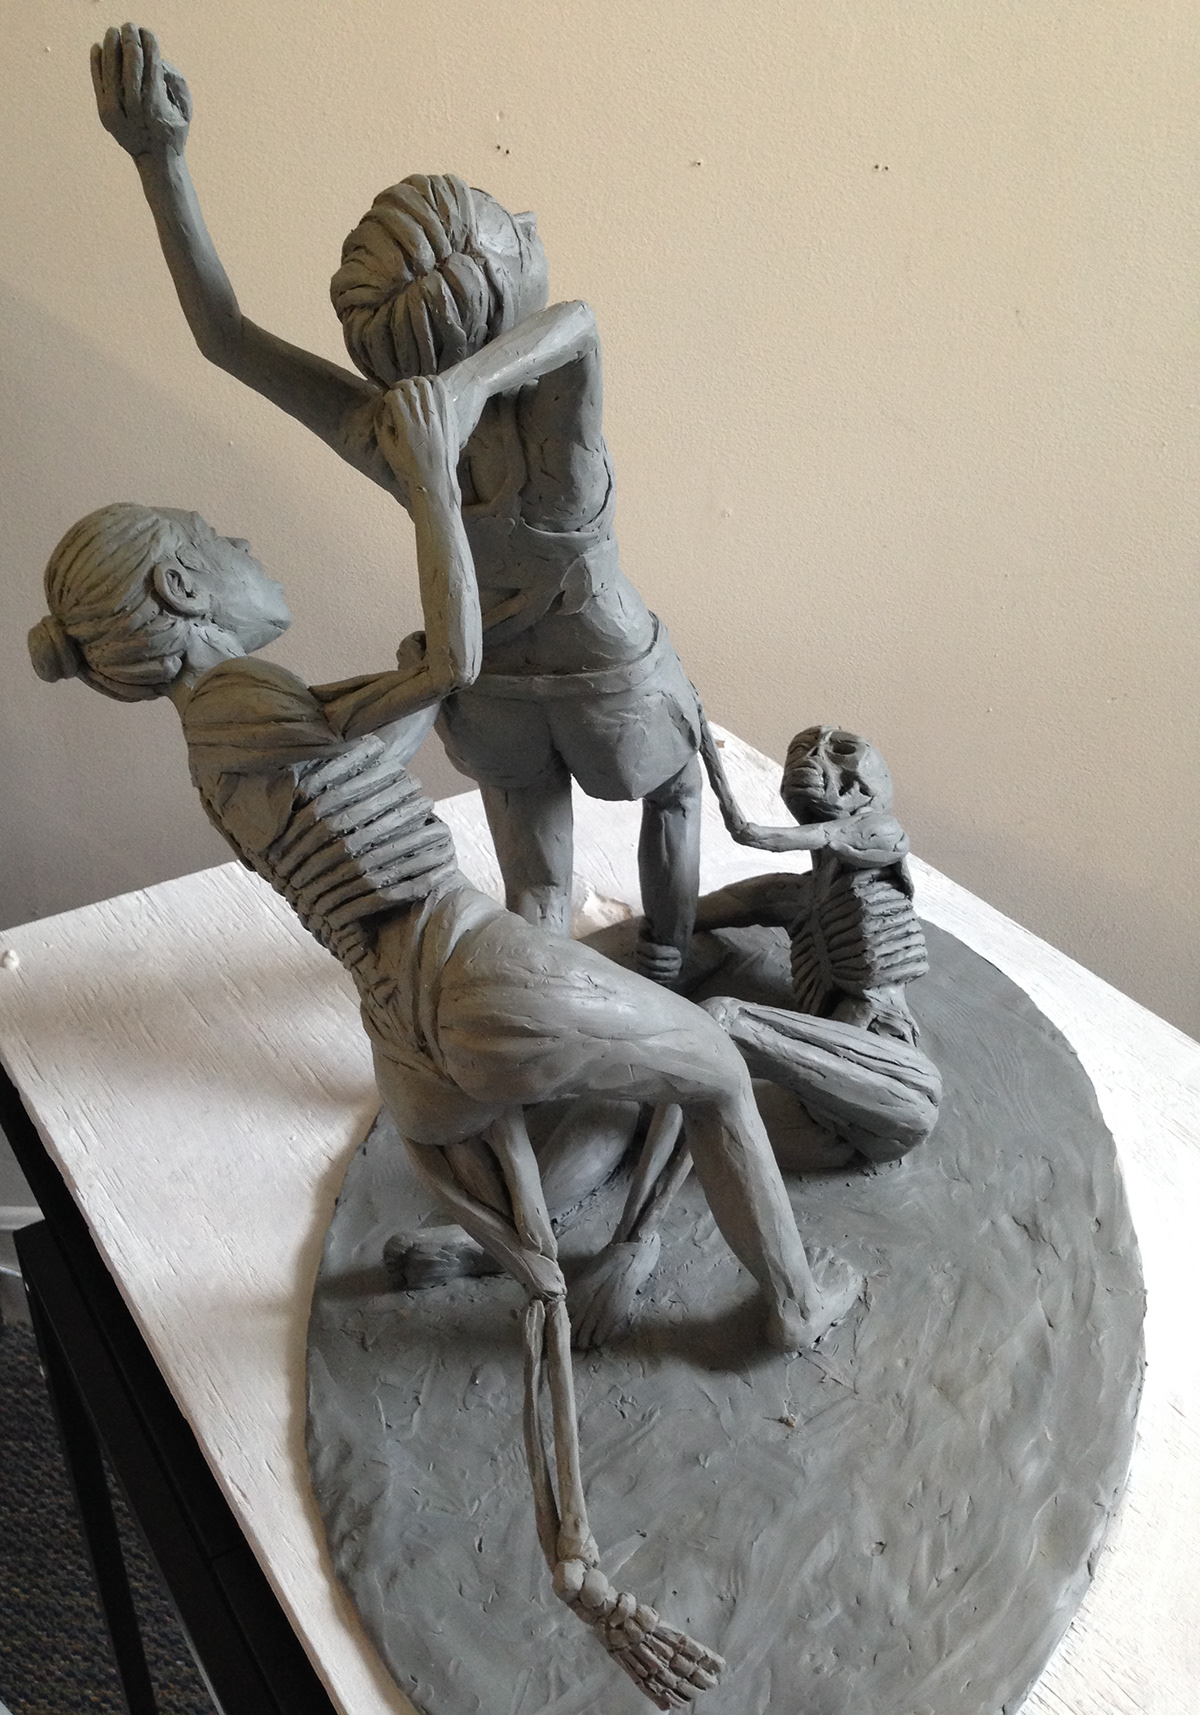 body image leech running Figure sculpture envy decay death body life bible proverb